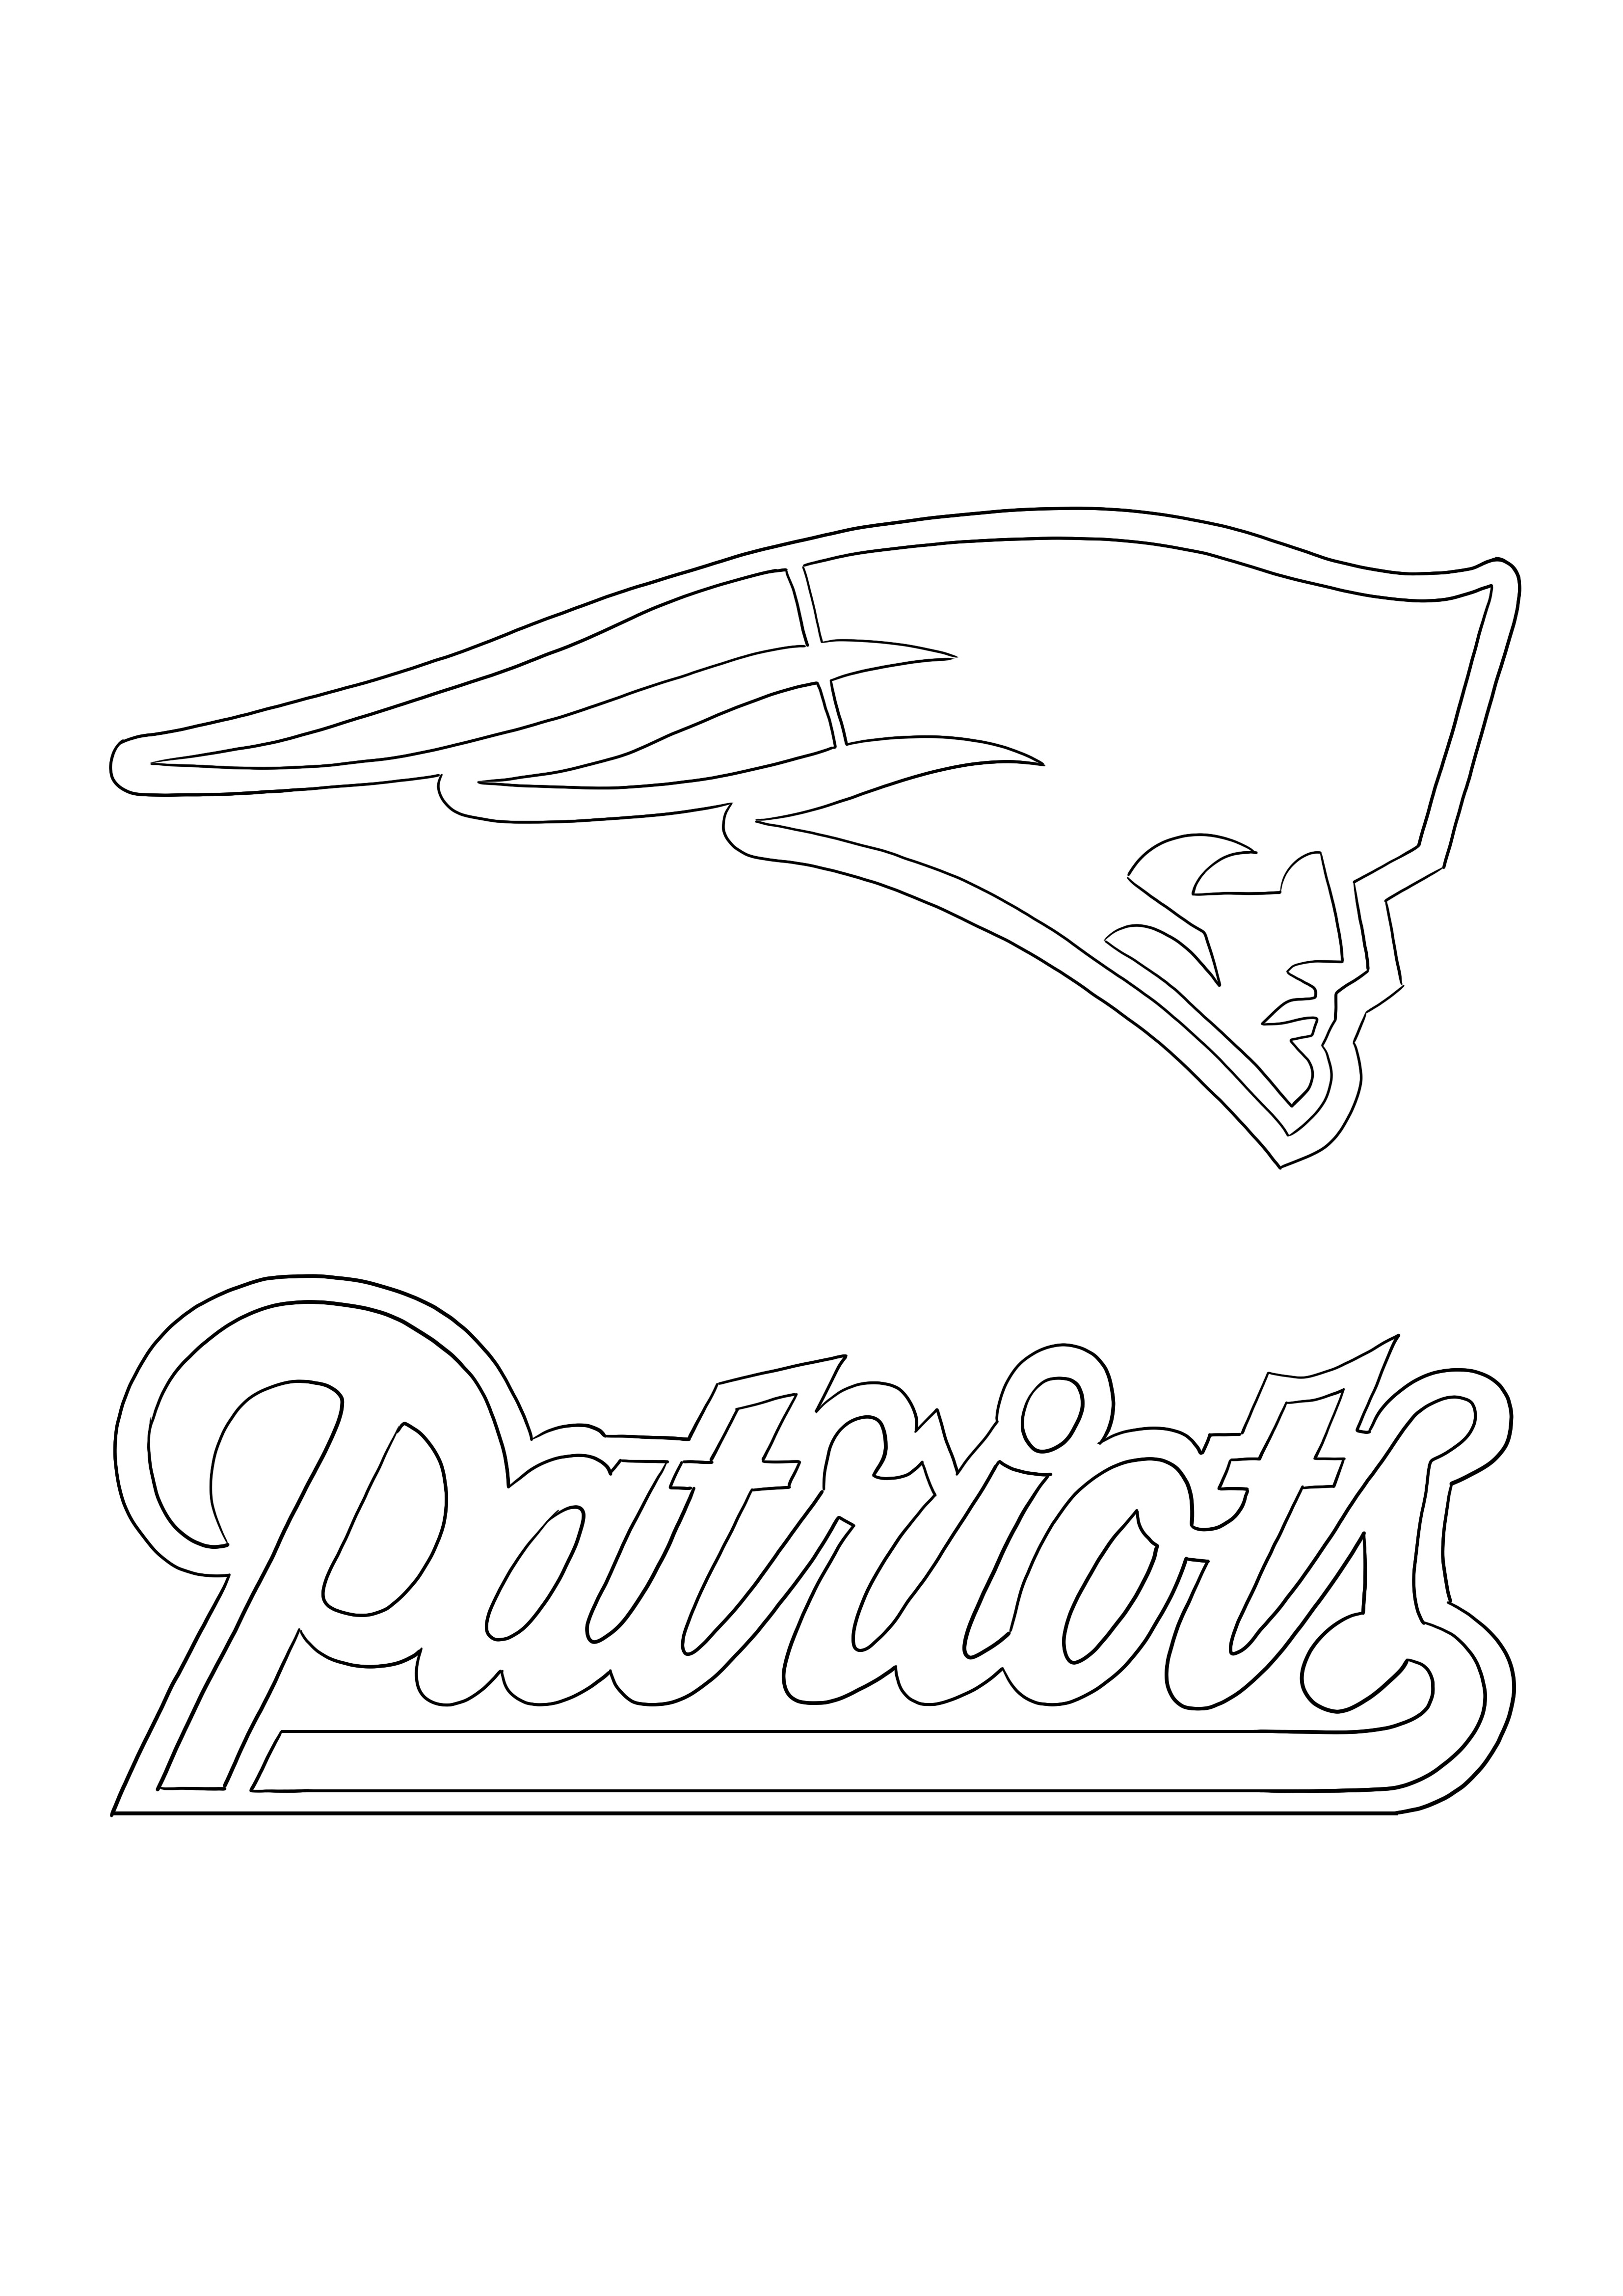 Patriots logo coloring and free downloading